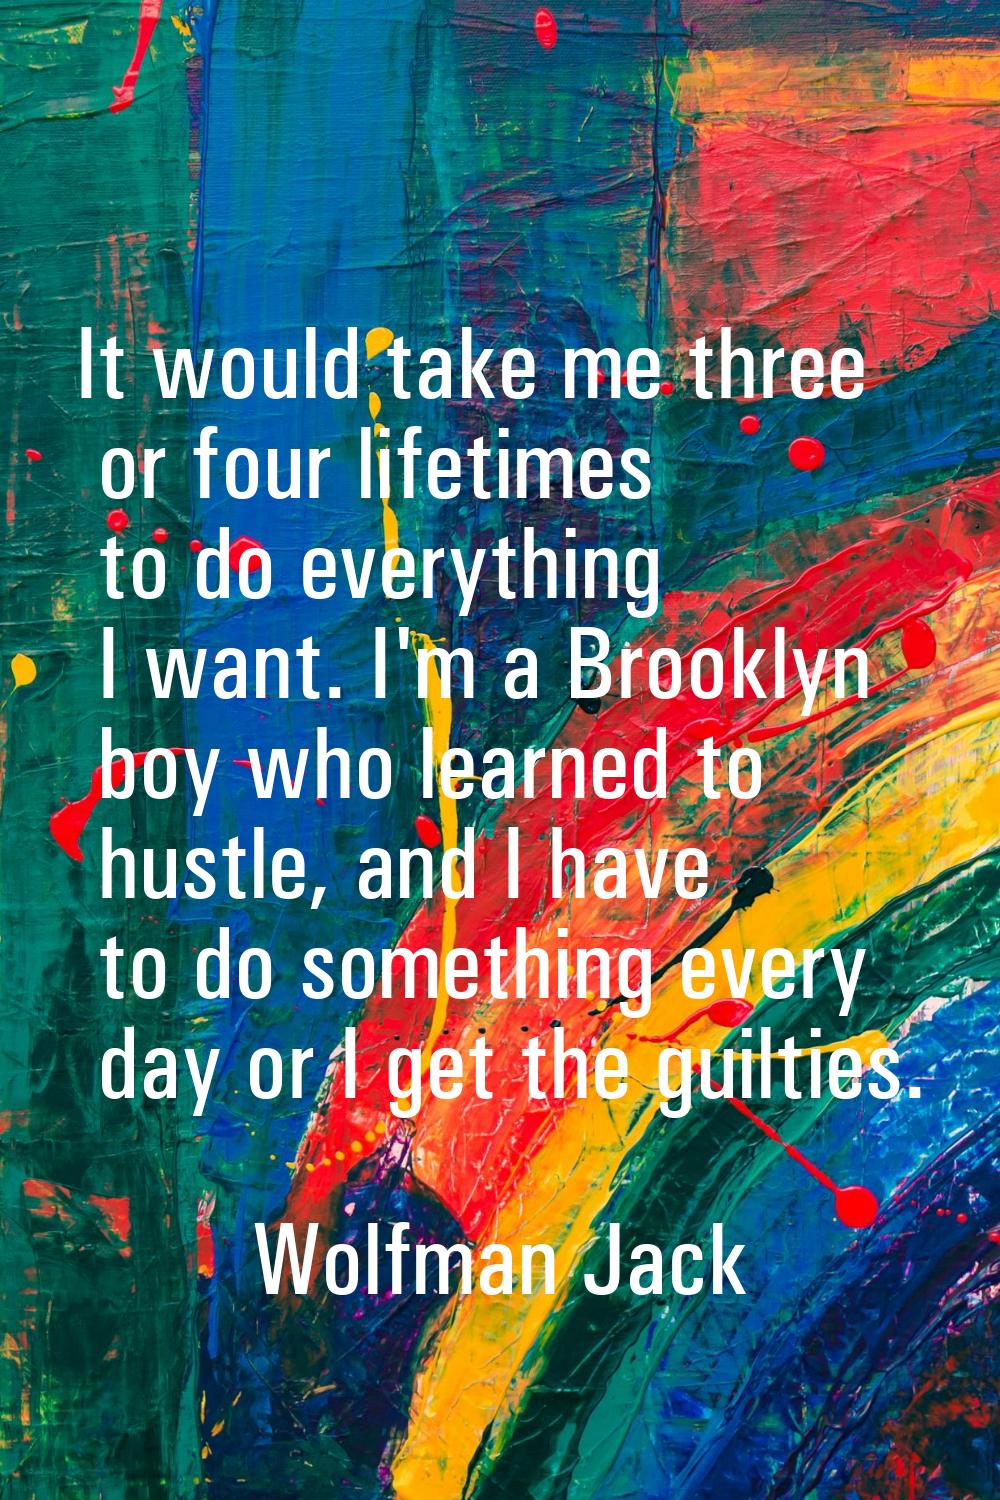 It would take me three or four lifetimes to do everything I want. I'm a Brooklyn boy who learned to